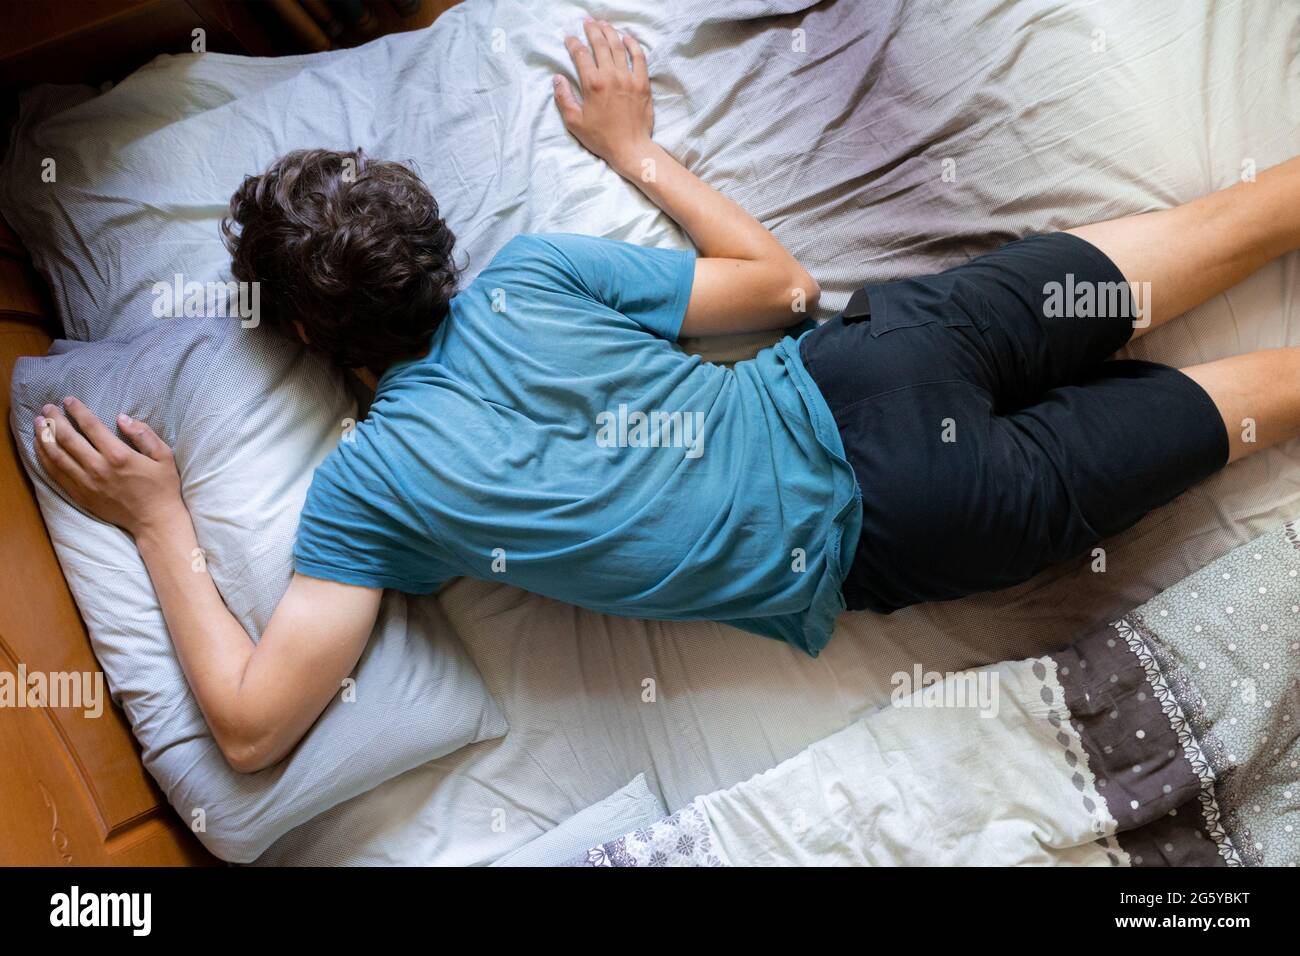 person's wrong position during the sleep in bed, bad posture Stock Photo